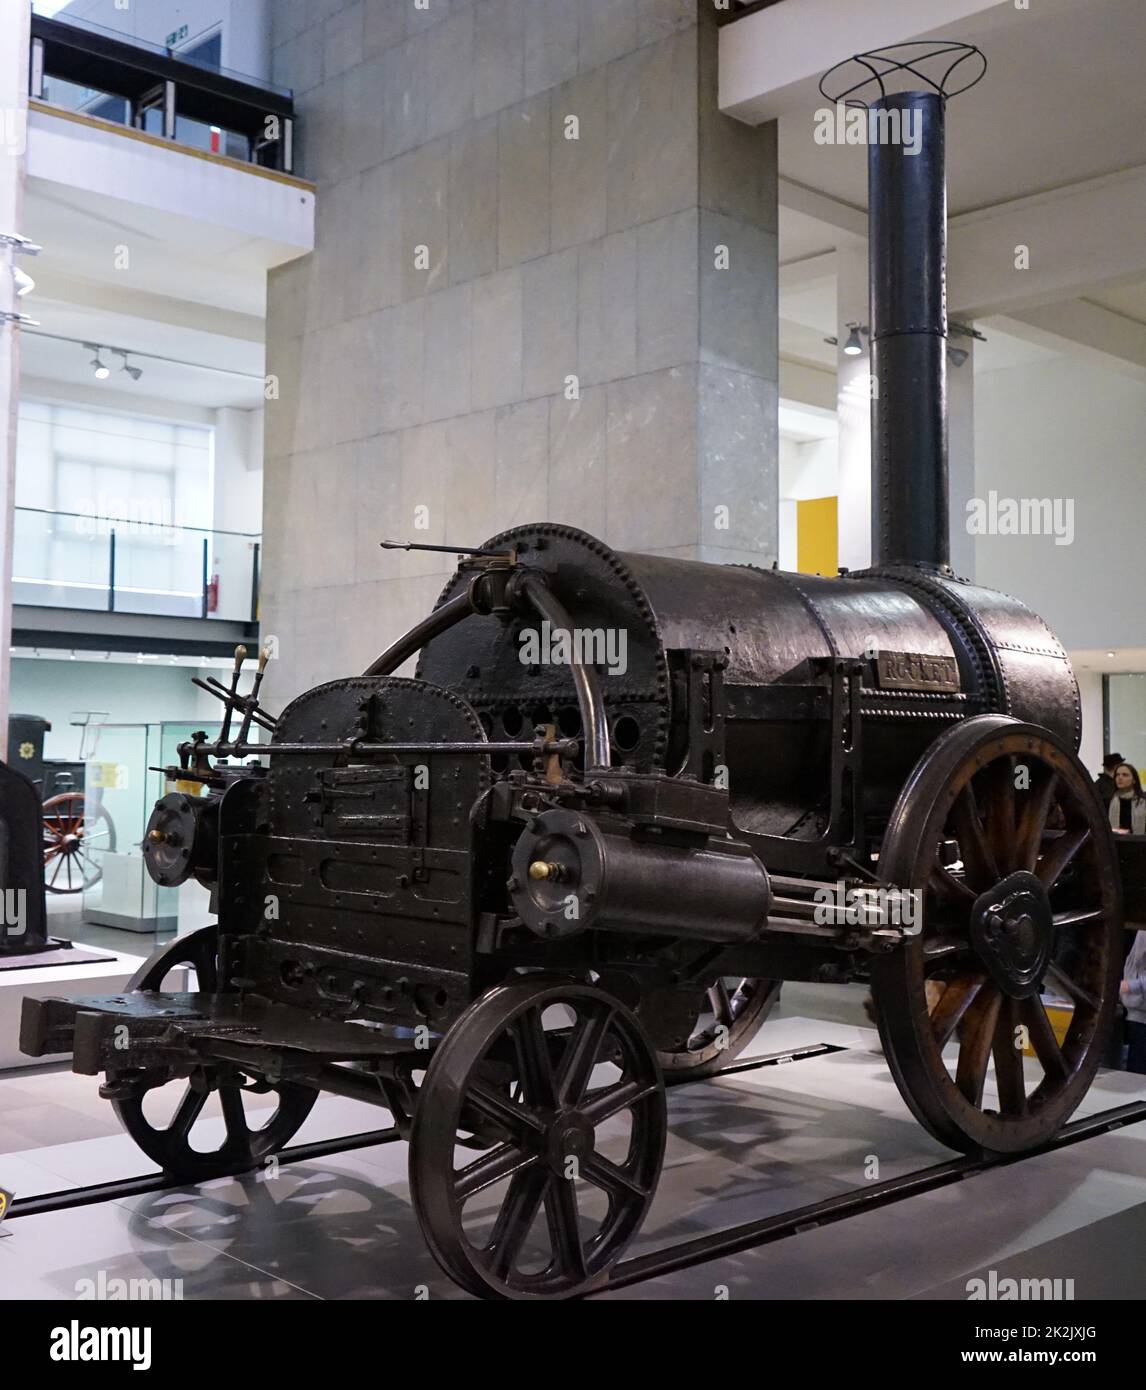 Example of the Stephenson's Rocket, an early steam locomotive designed by Robert Stephenson (1803-1859) an early railway engineer. Dated 19th Century Stock Photo